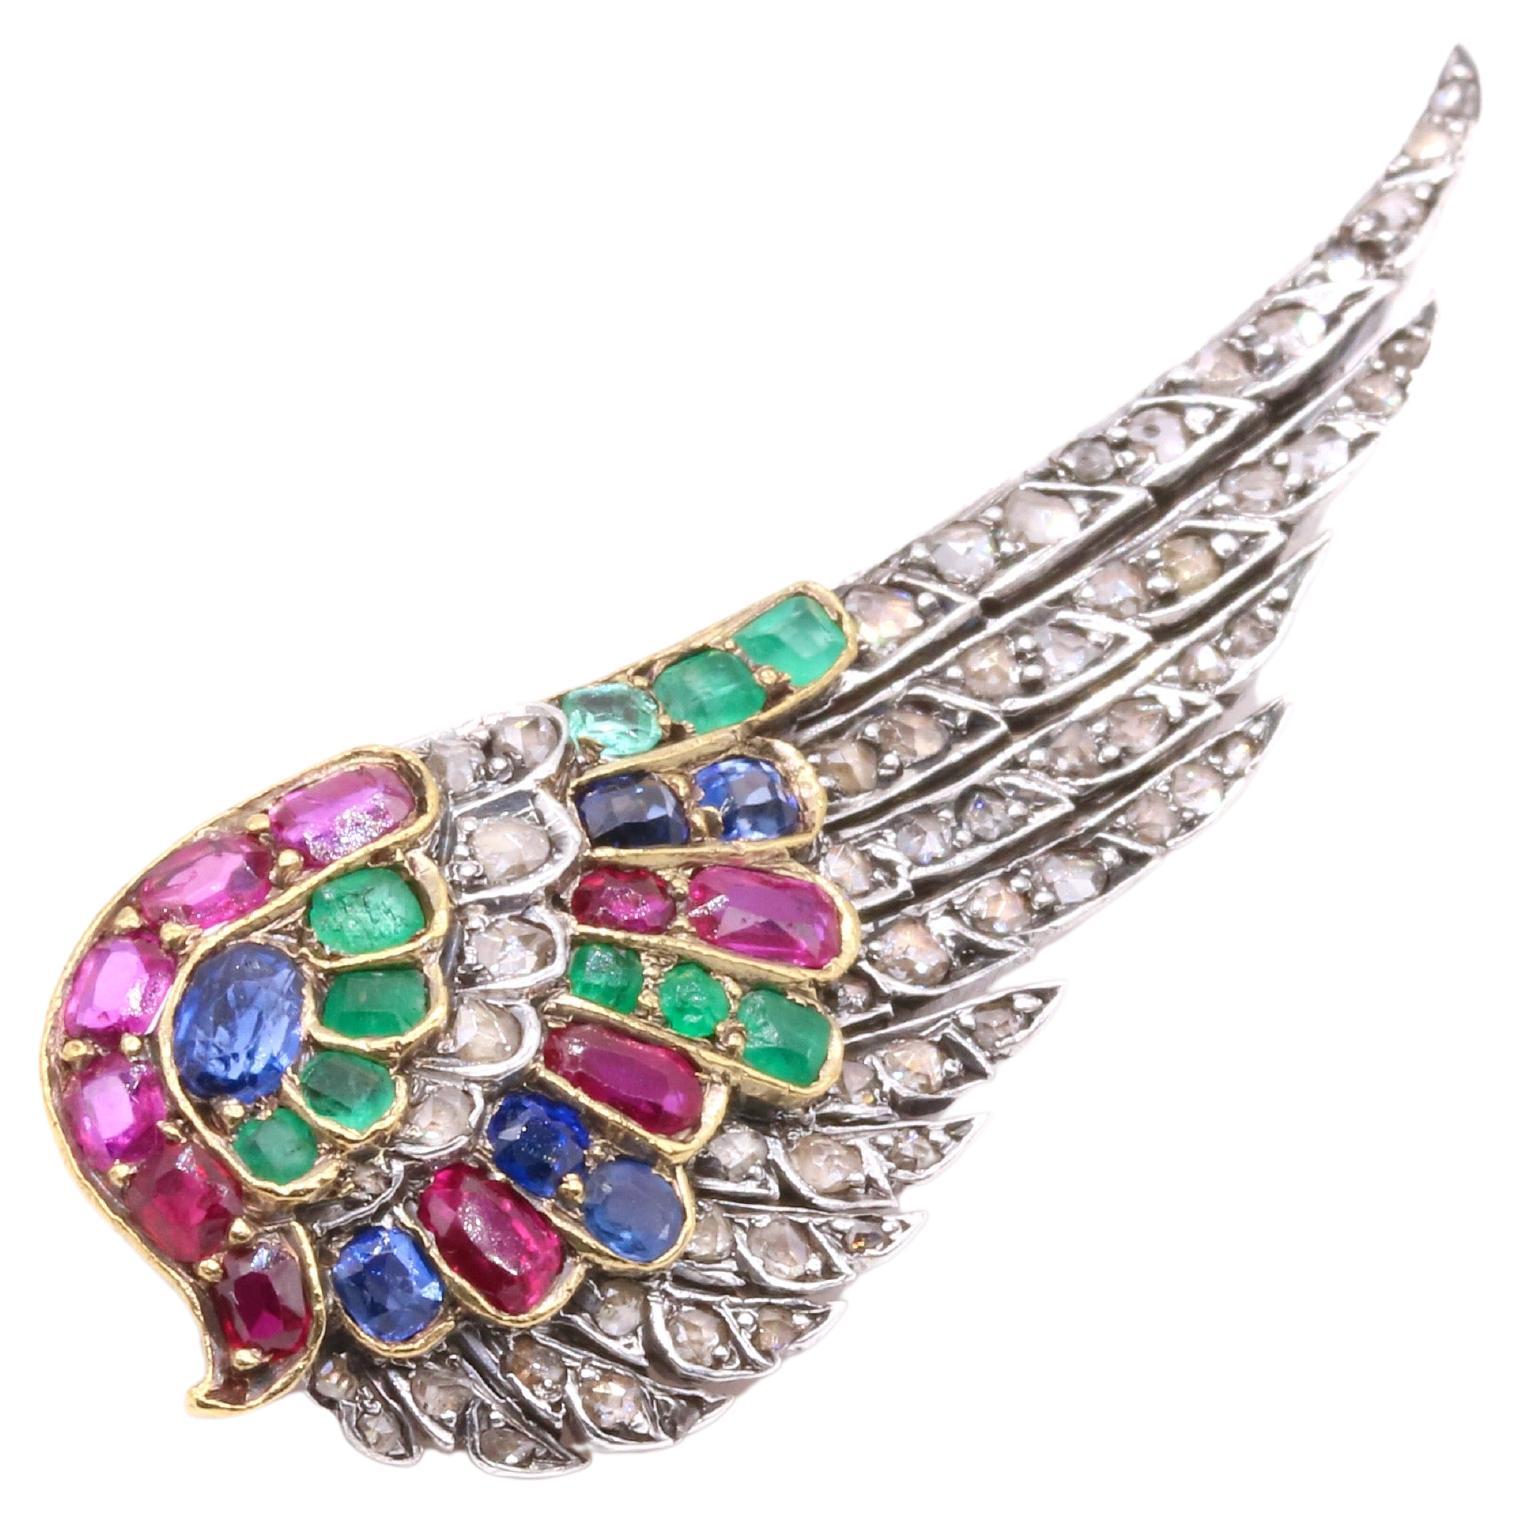 French Antique 18K Gold & Silver Ruby, Sapphire, Emerald & Diamond Wing Brooch For Sale